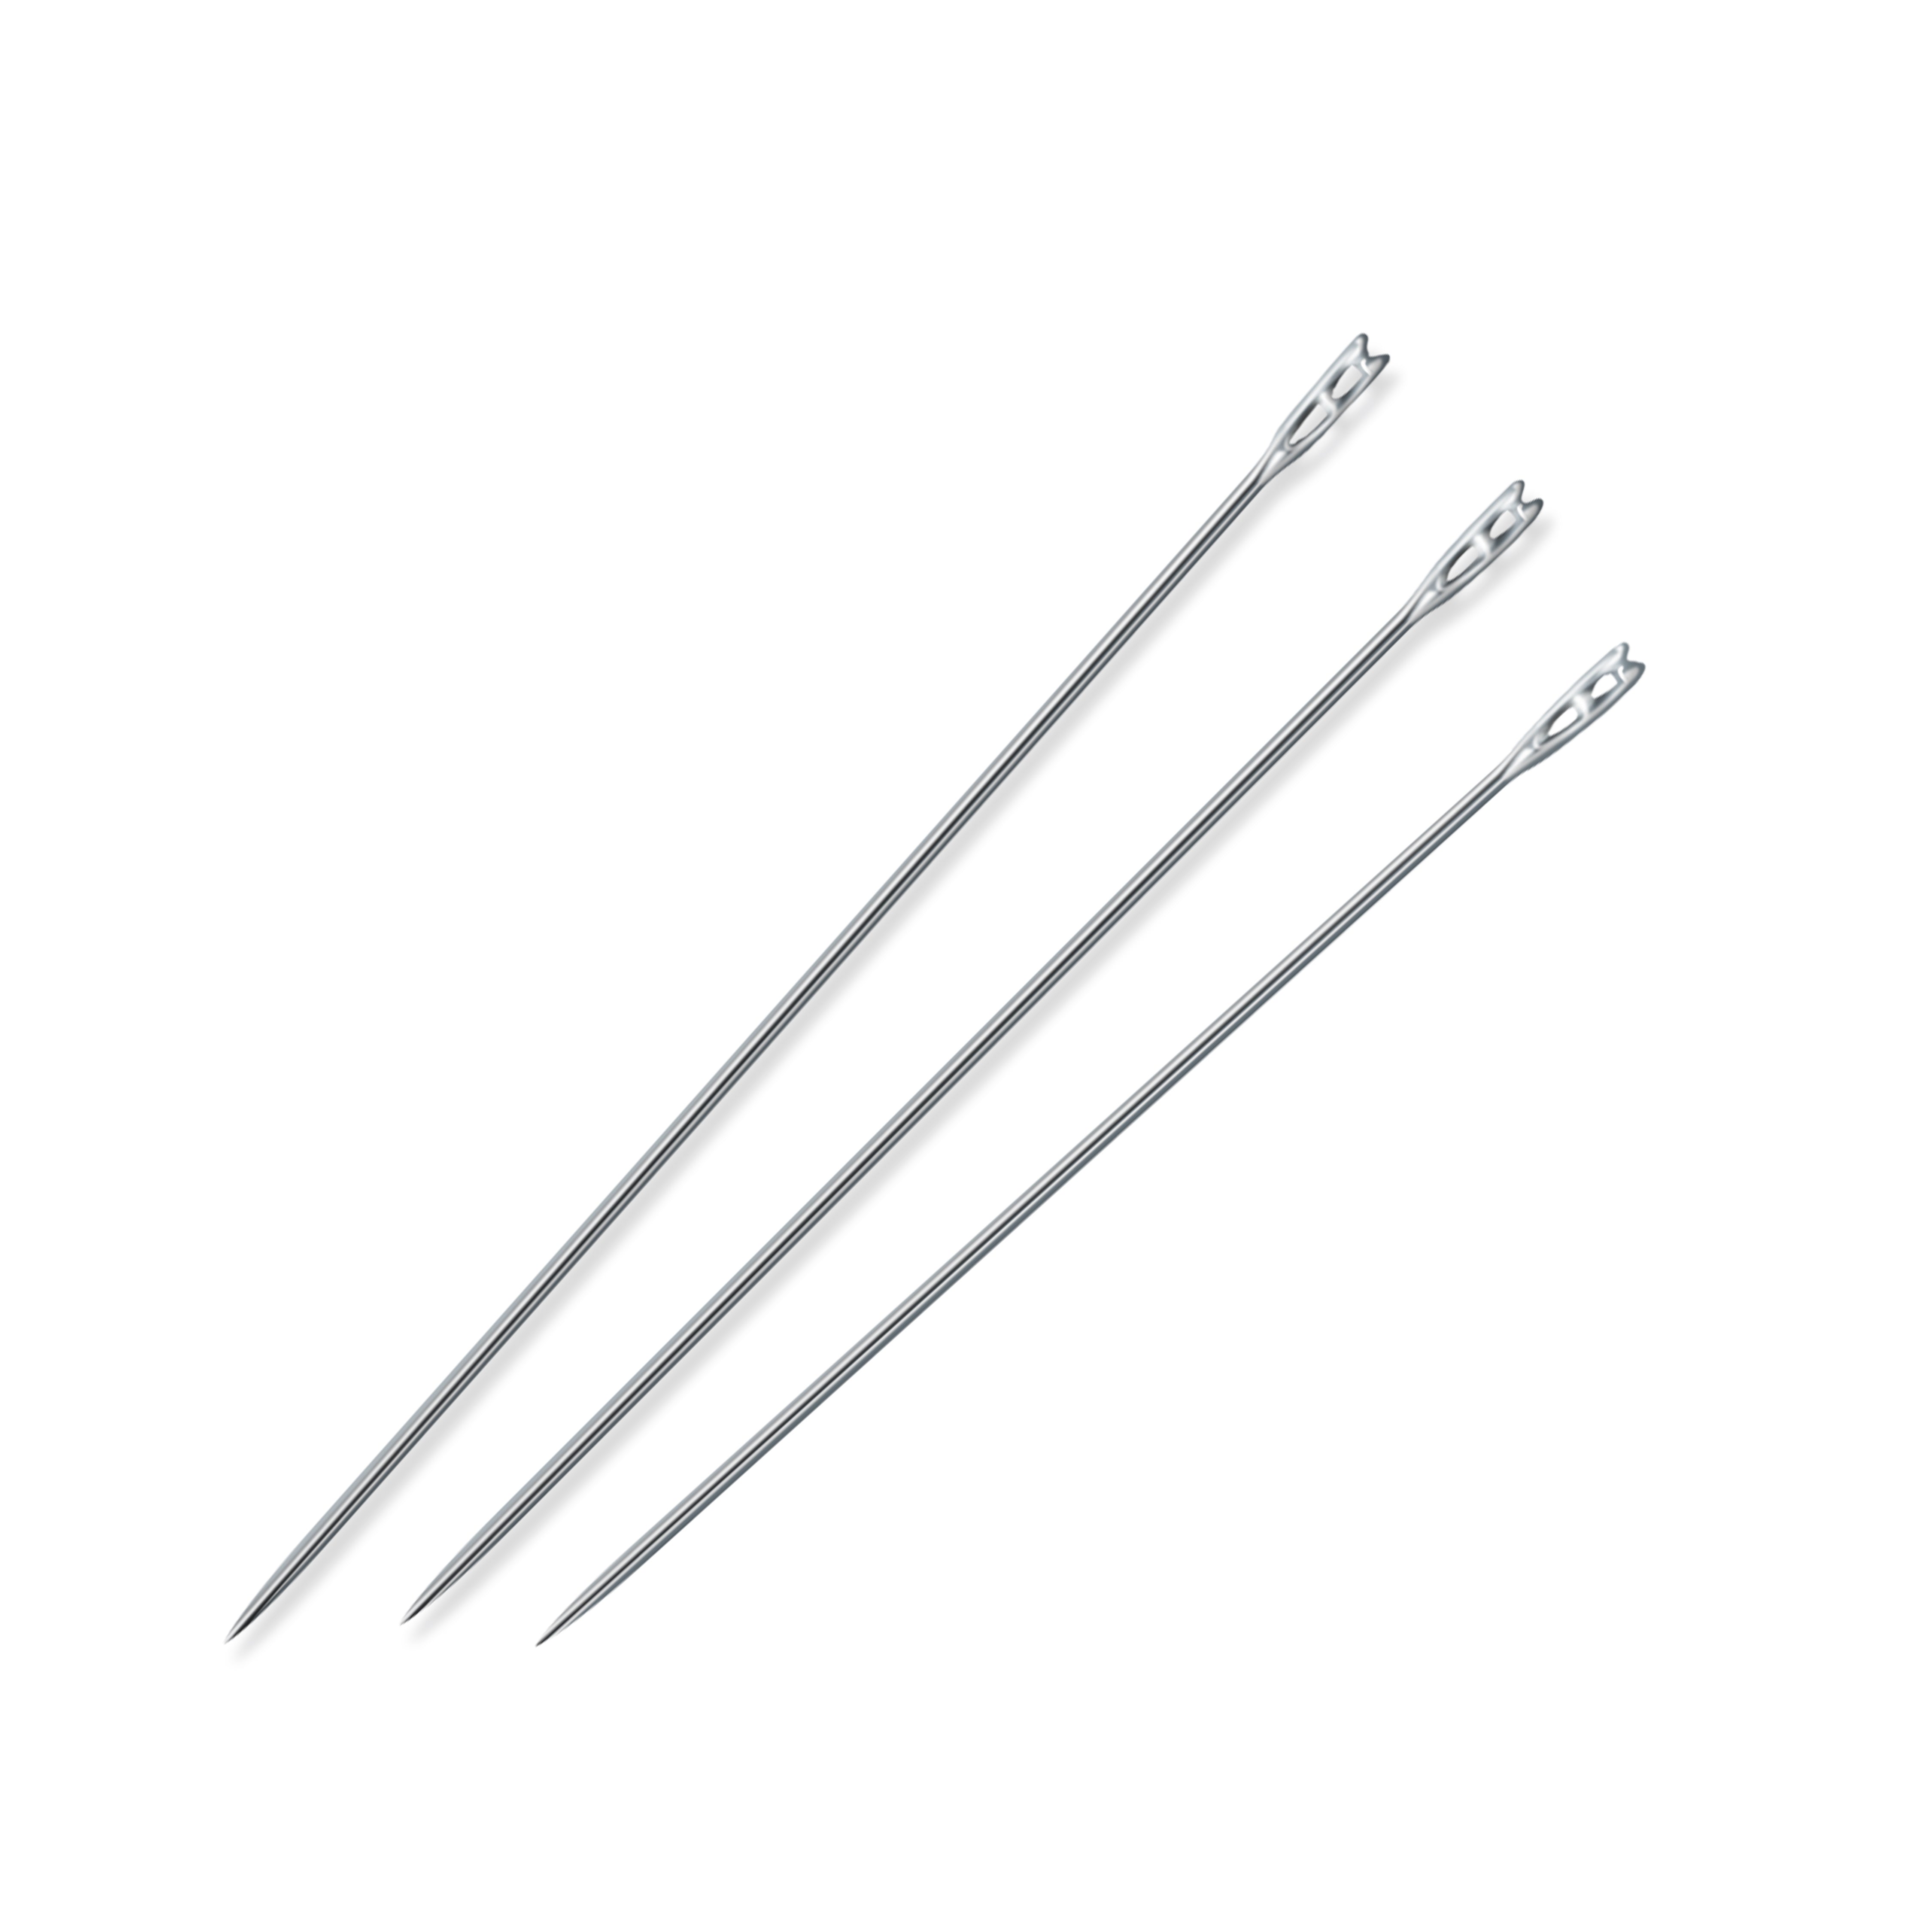 Elderly-Friendly Blind Needles for Sewing & Crafting – RainbowShop for Craft